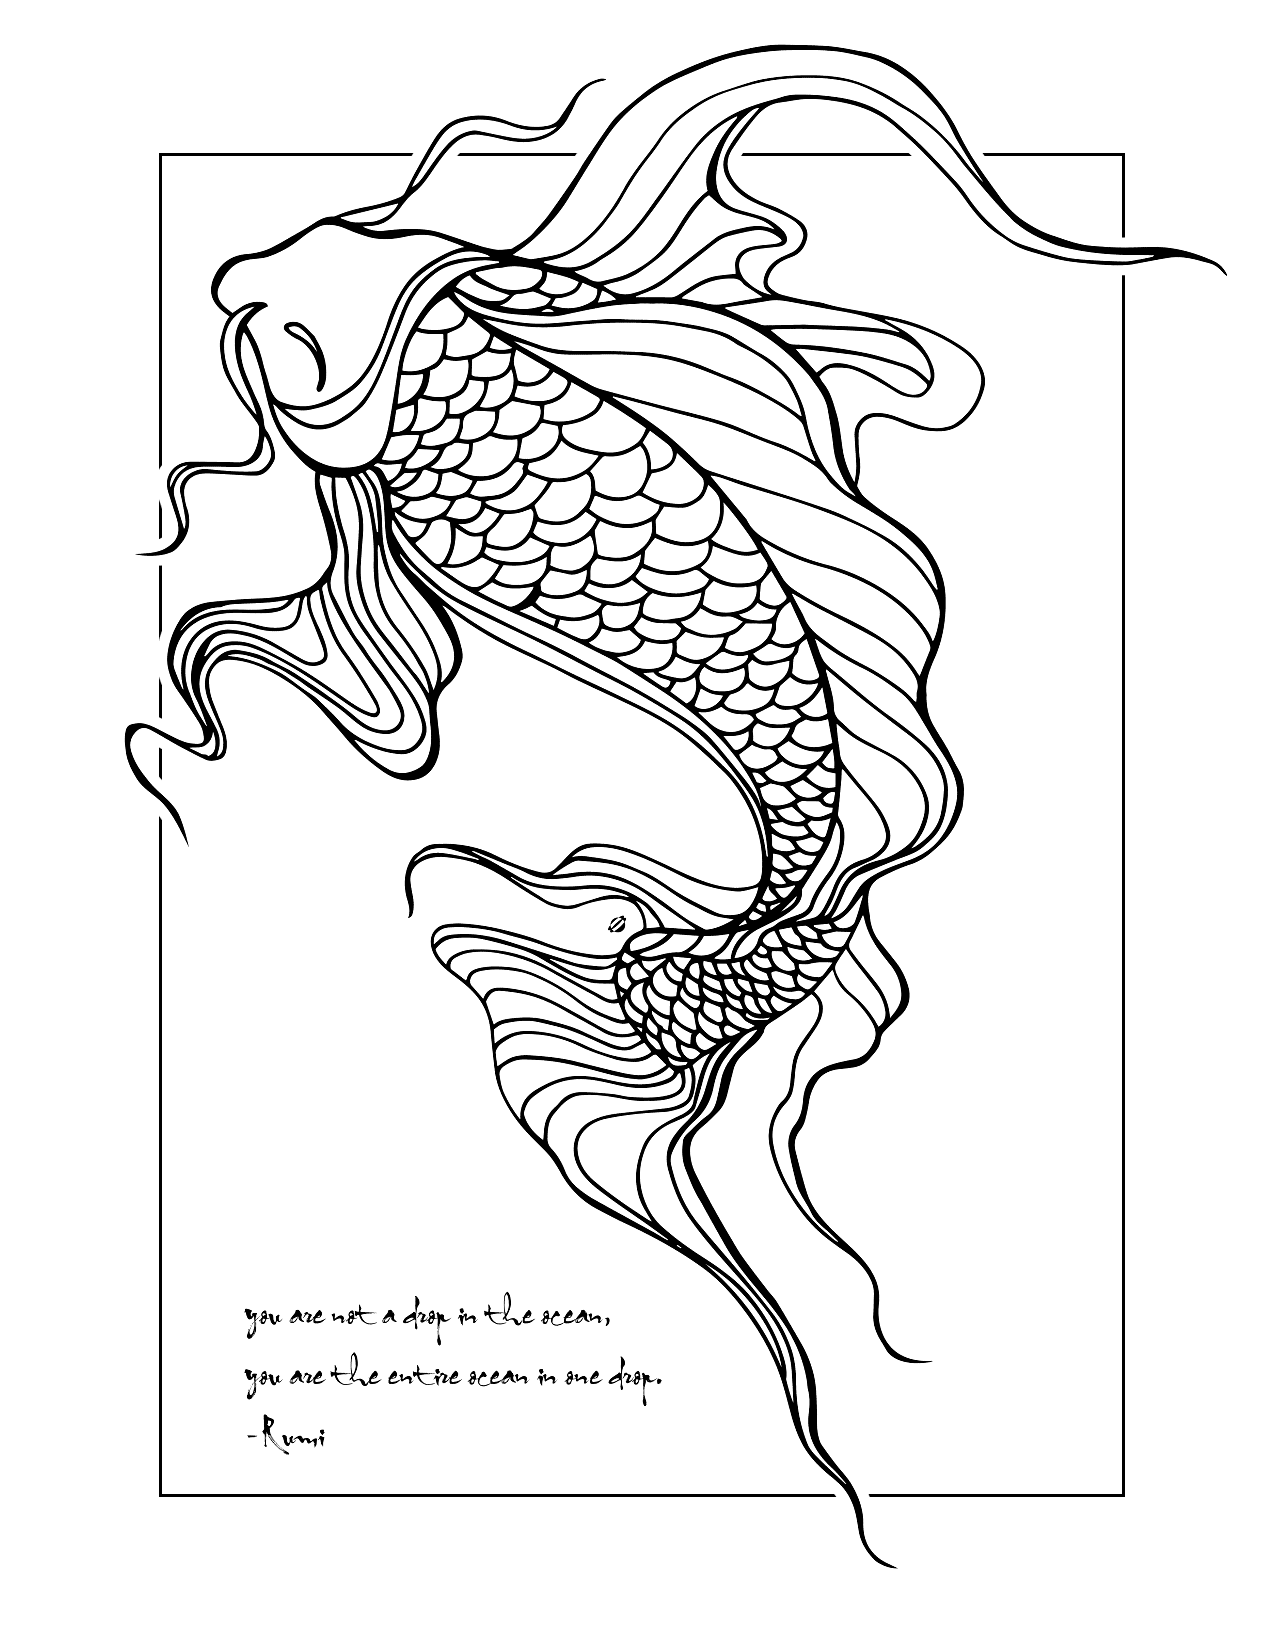 Fish With Saying Coloring Page For Adults